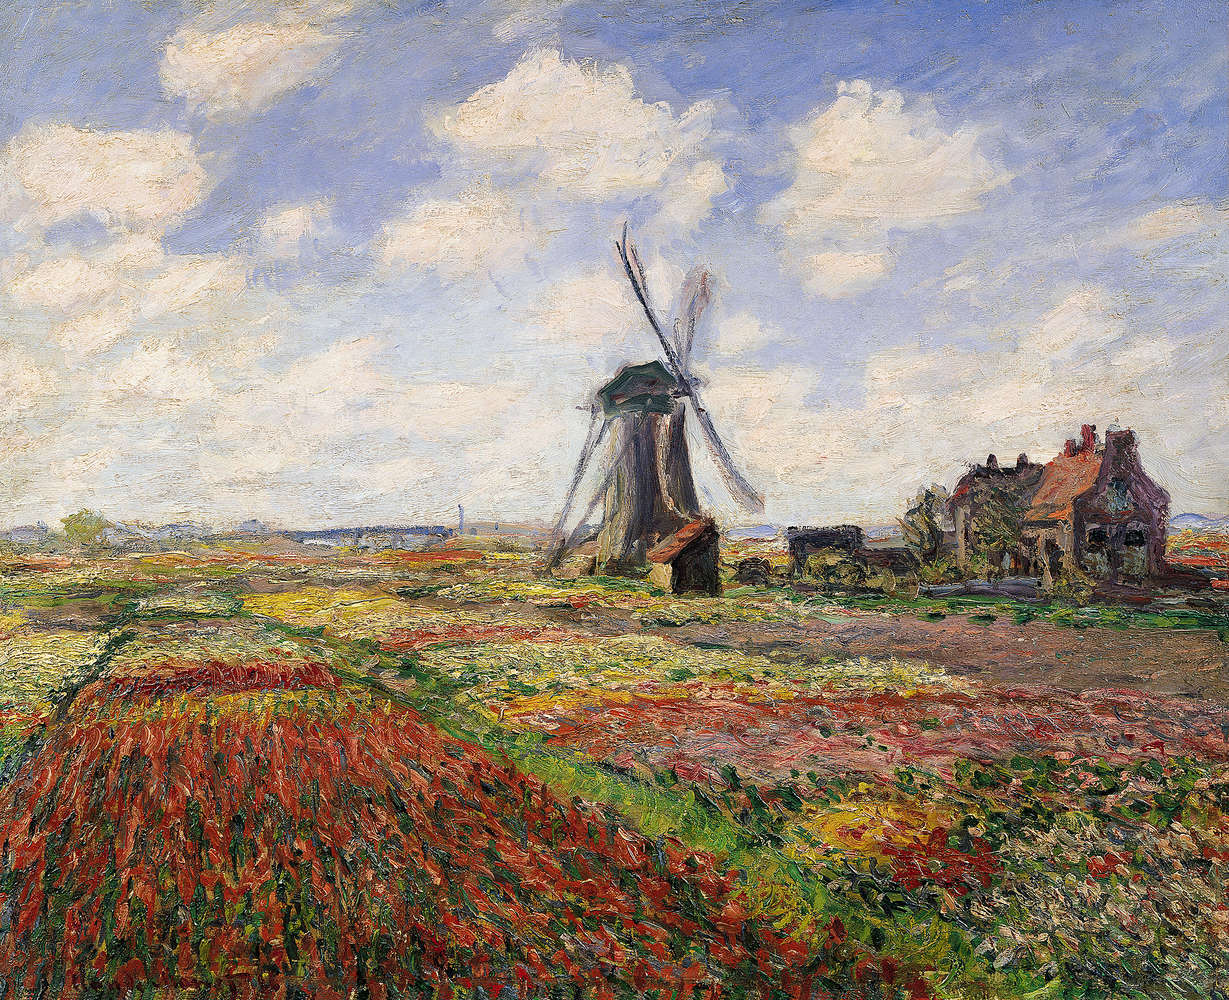             Photo wallpaper "Tulip fields with the windmill of Rijnsburg" by Claude Monet
        